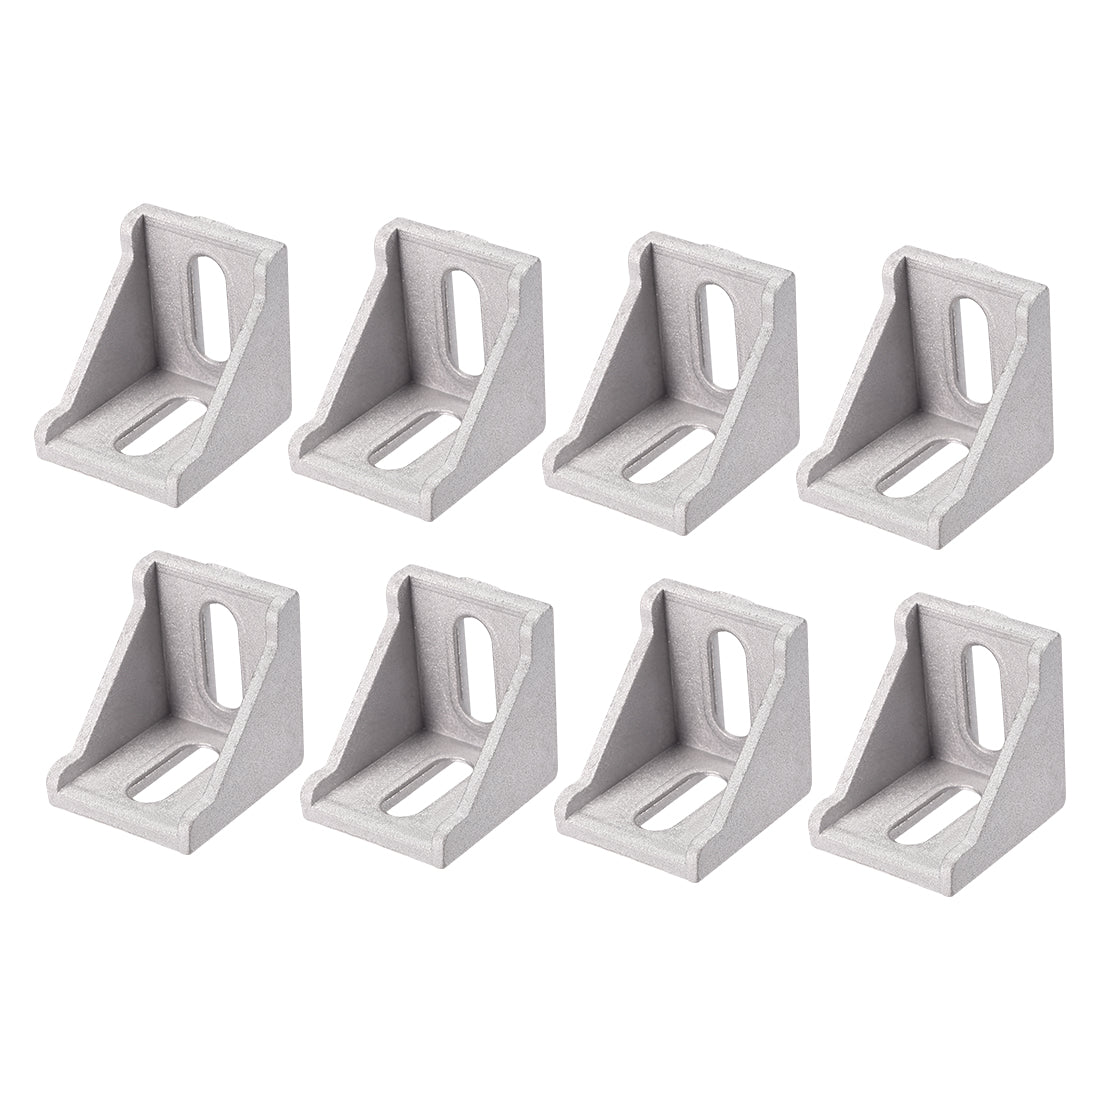 uxcell Uxcell Inside Corner Bracket Gusset, 40mm x 40mm for 4040 Series Aluminum Extrusion Profile with Slot 8mm, 8 Pcs (Silver)